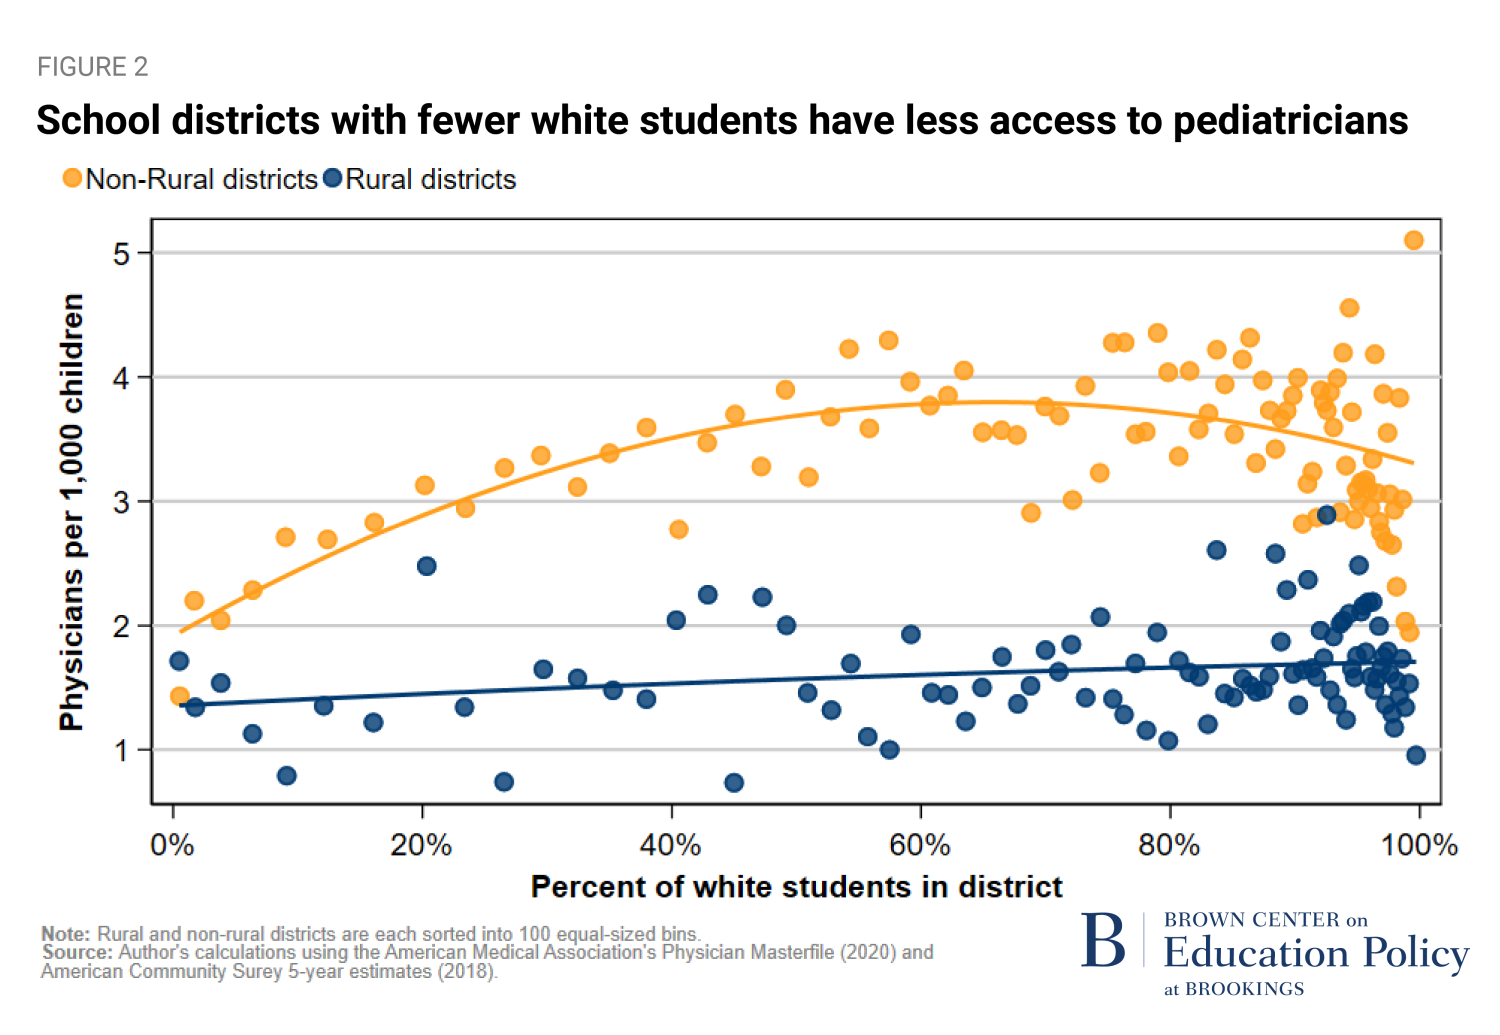 School districts with fewer white students have less access to pediatricians